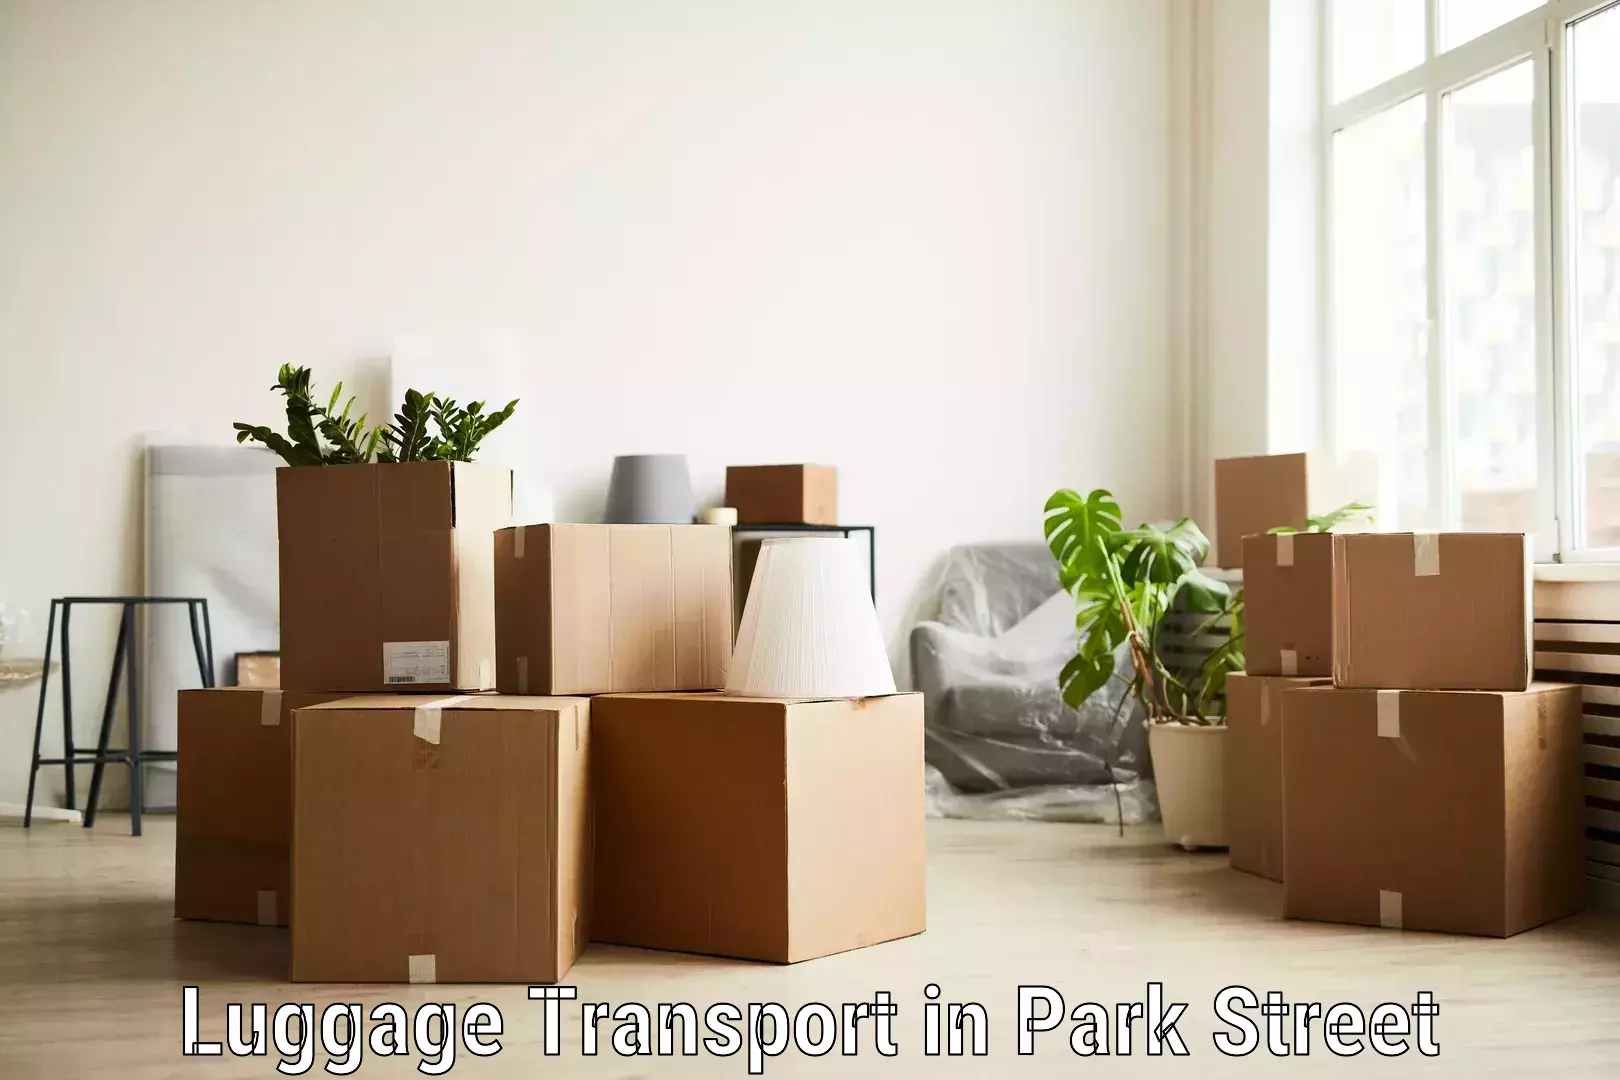 Luggage transport rates in Park Street